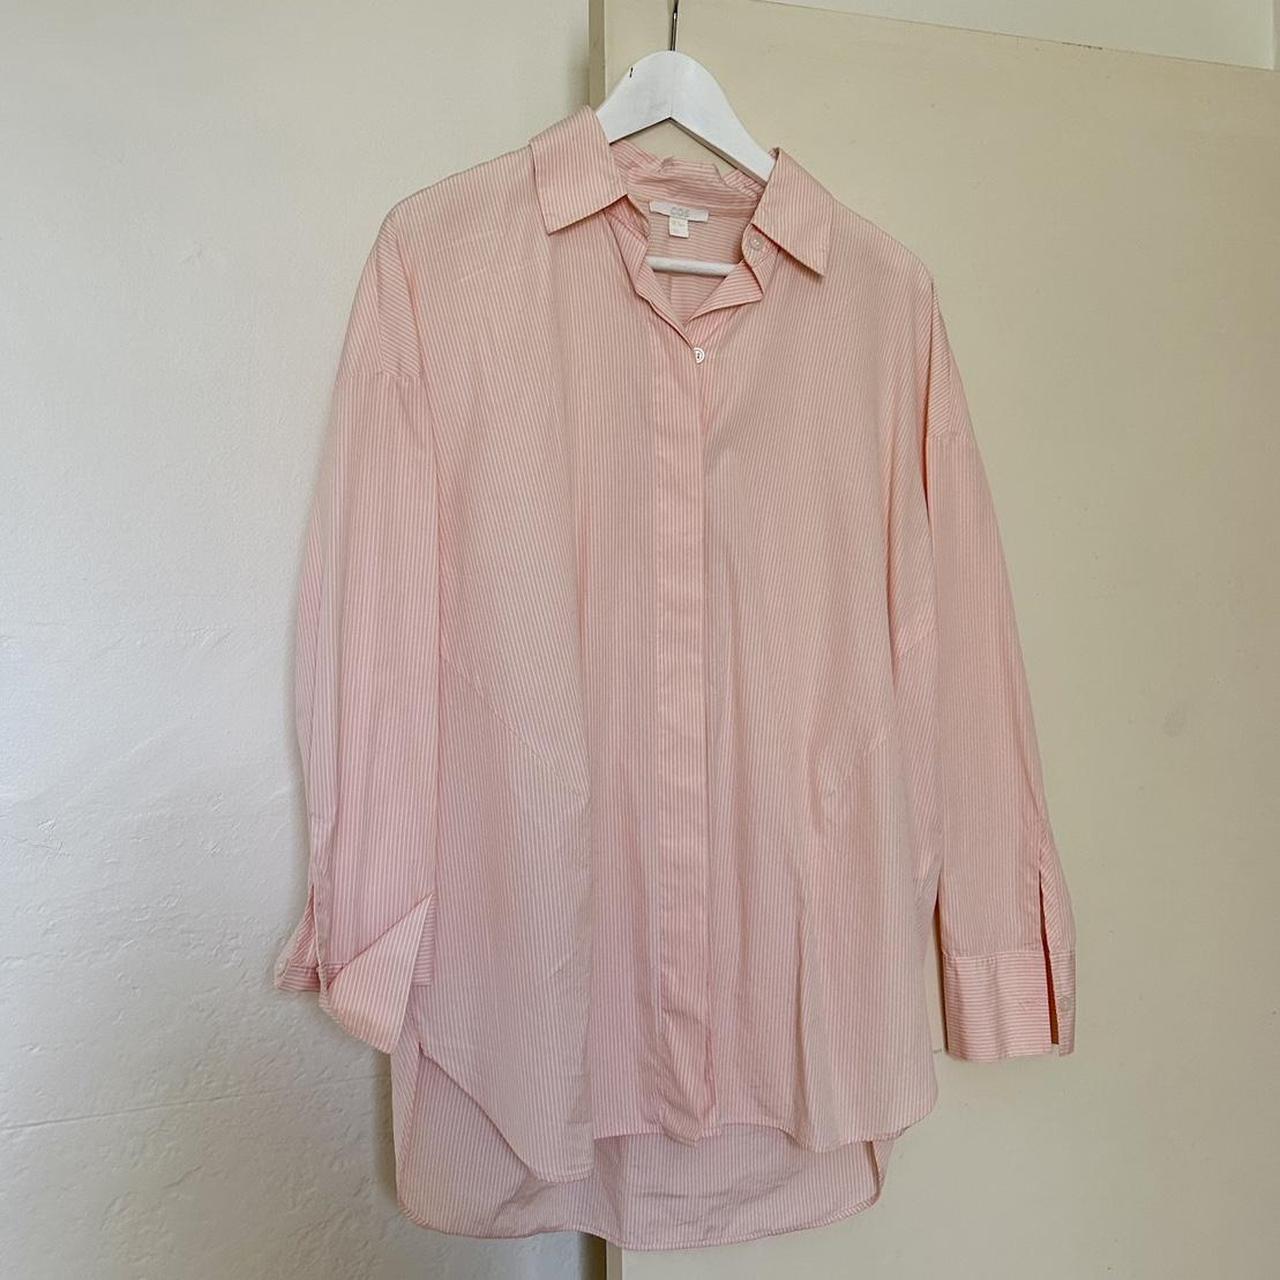 🍇 COS oversized pink and white stripe button up shirt - Depop